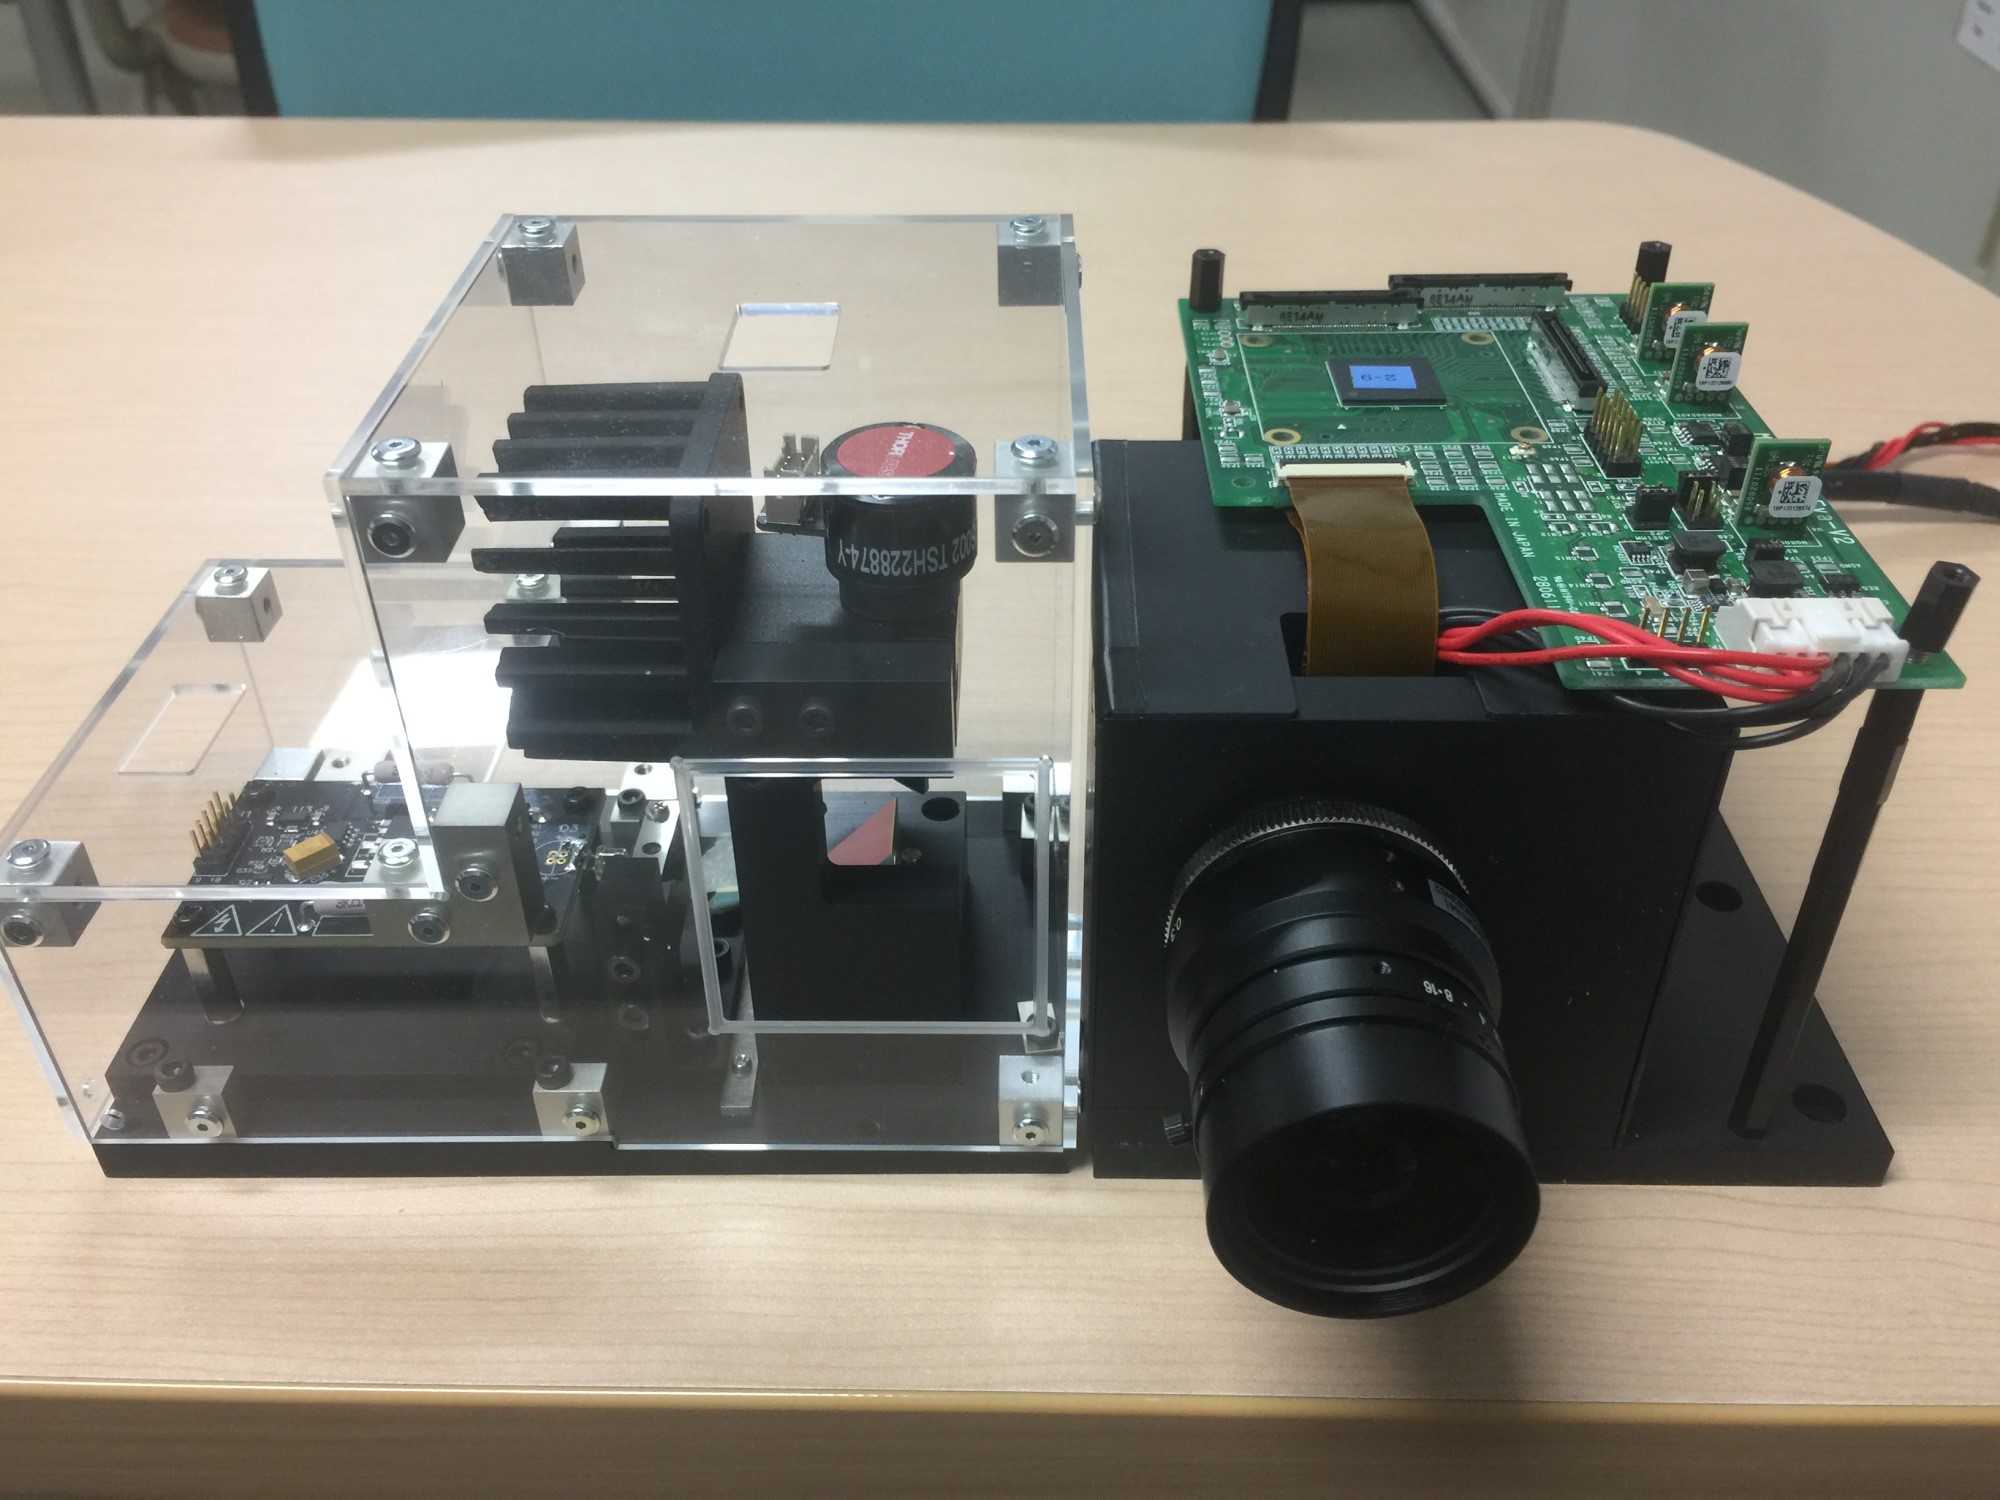 The prototype LiDAR announced in July 2020